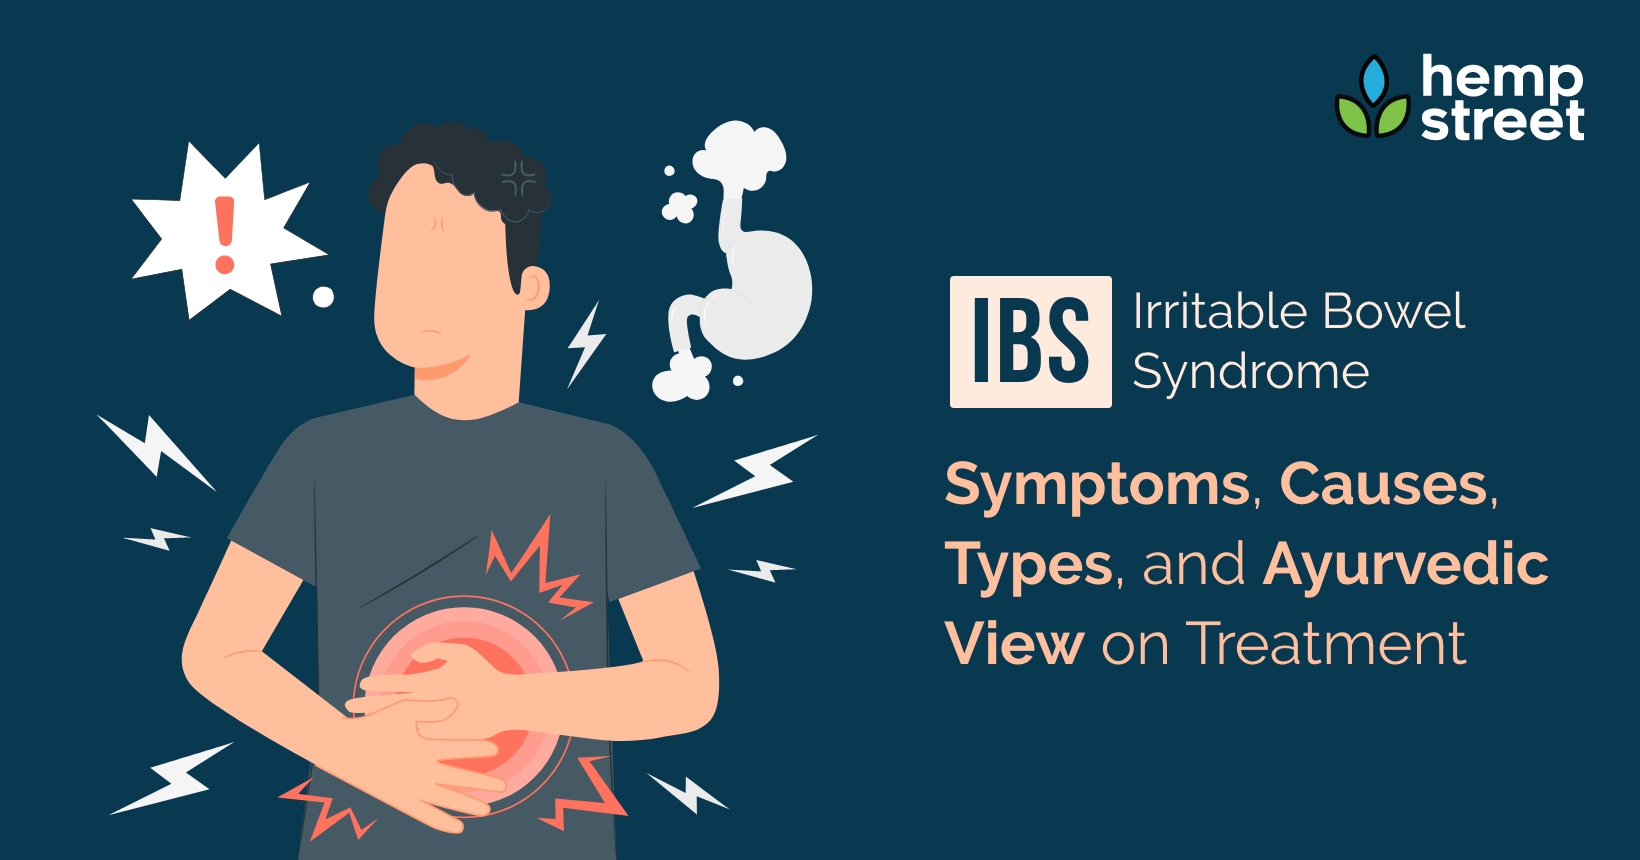 5 Products to Help Manage Irritable Bowel Syndrome (IBS) I